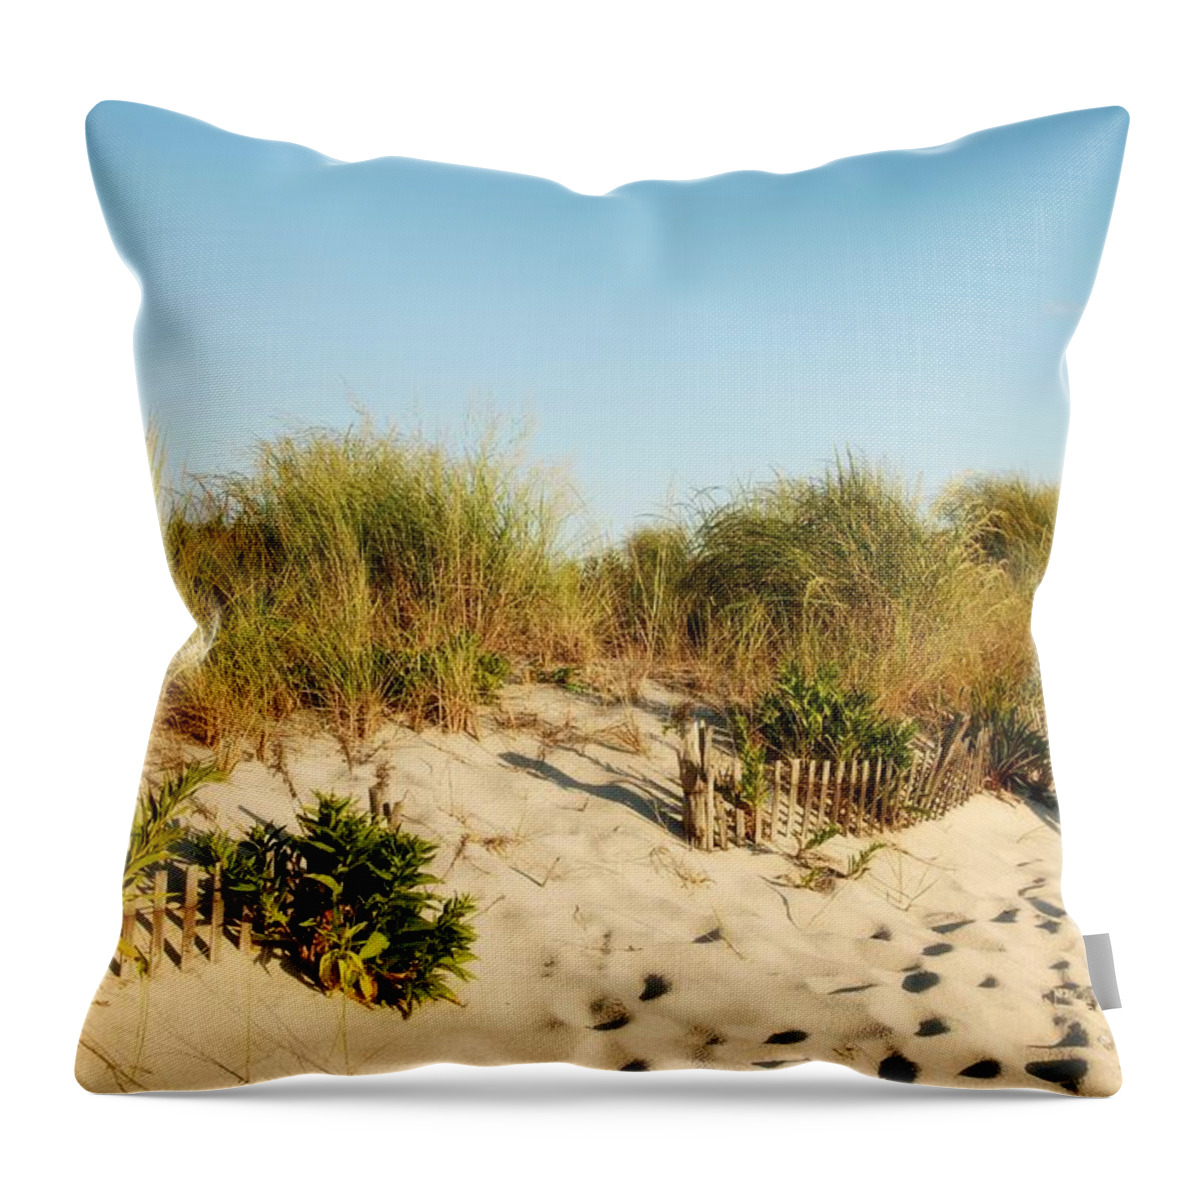 Jersey Shore Throw Pillow featuring the photograph An Opening In The Fence - Jersey Shore by Angie Tirado